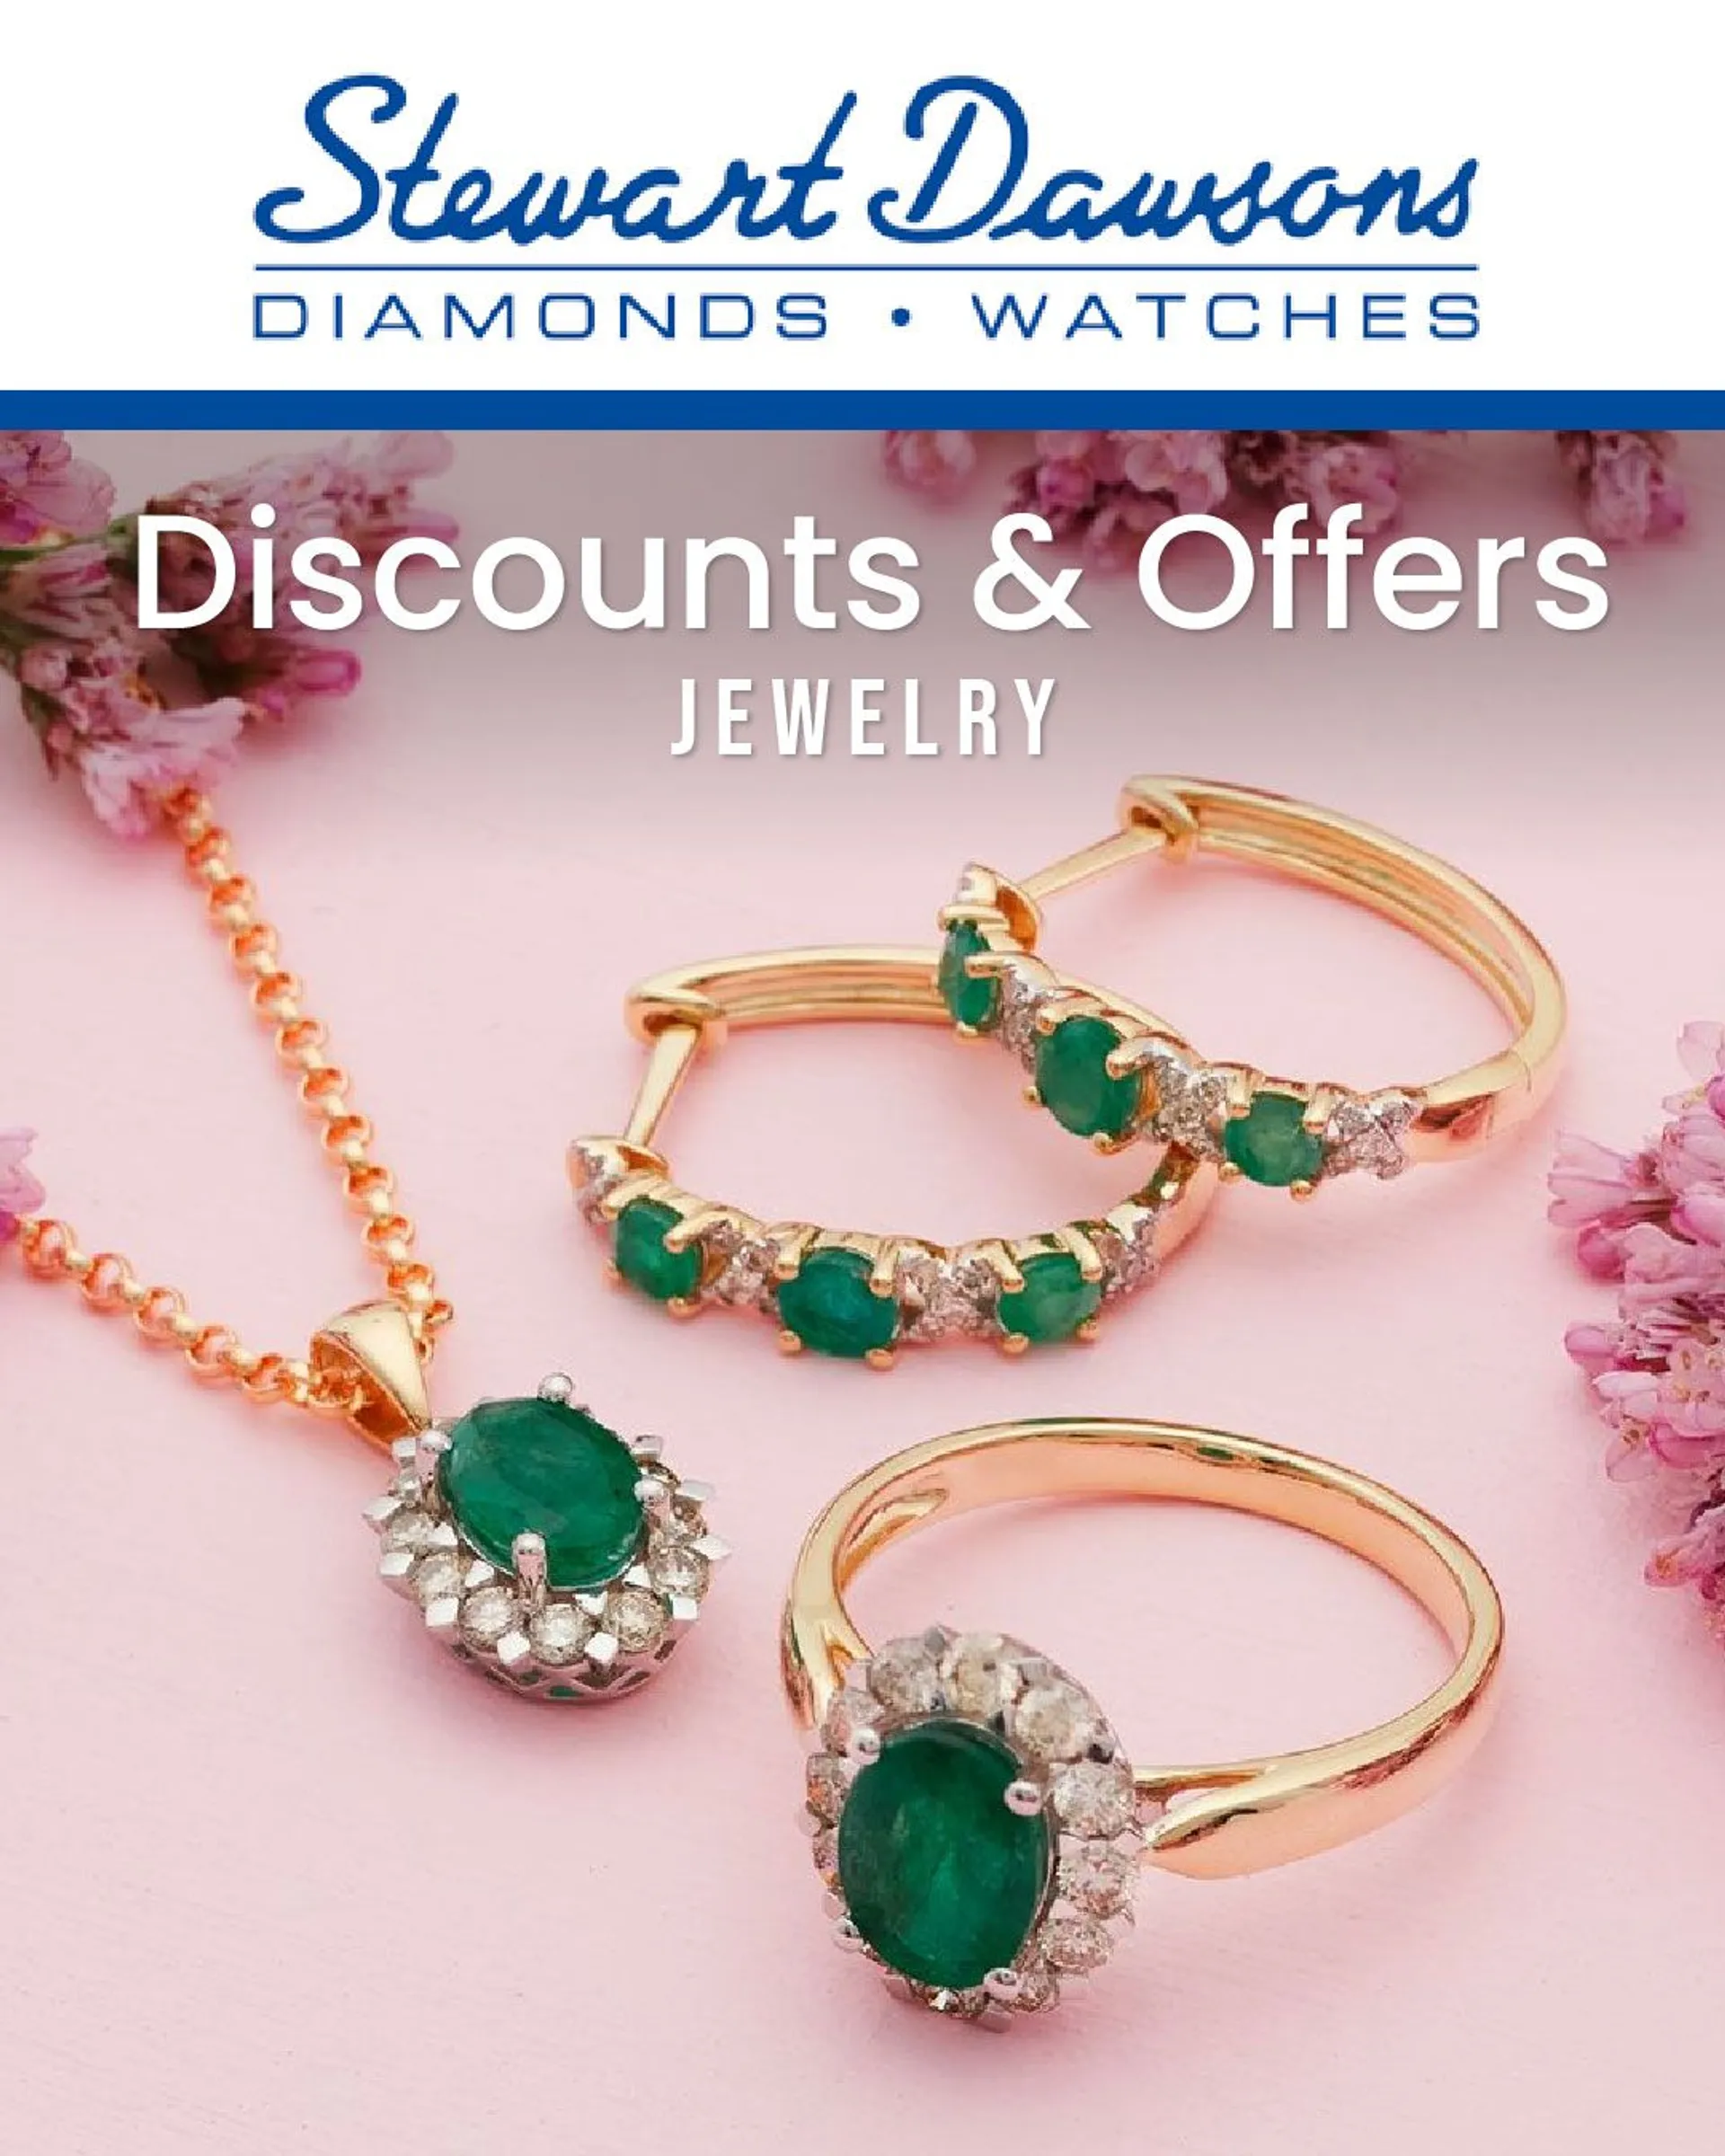 Stewart Dawsons - Jewellery and Watches - 22 March 27 March 2024 - Page 1